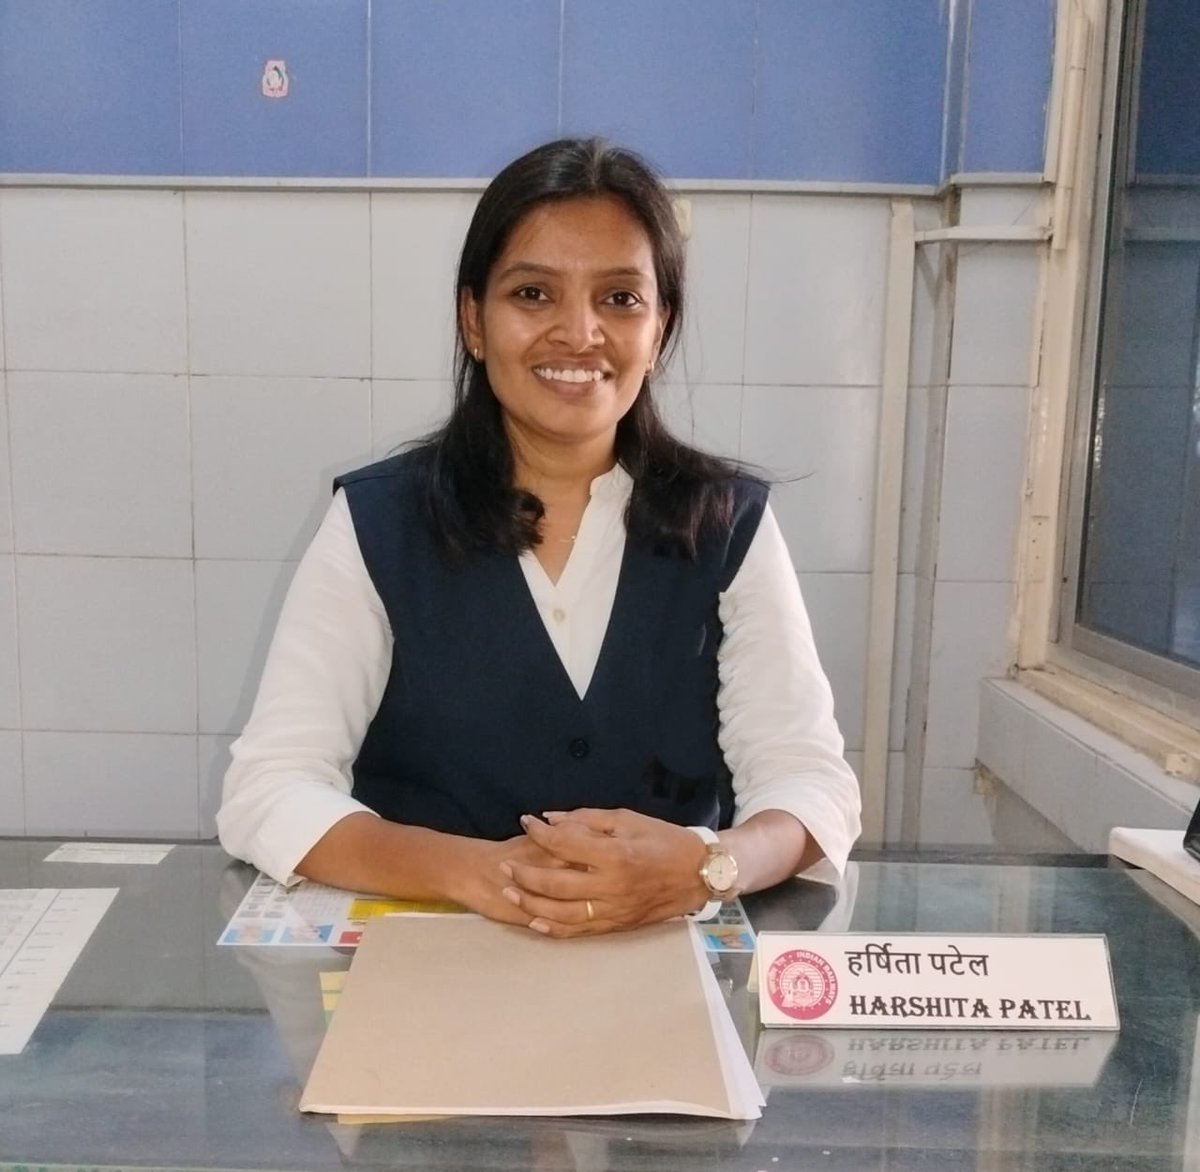 We are proud to announce the appointment of Smt. Harshita A. Patel as the First Female Dy. Station Superintendent (Commercial) of Bilimora Jn.  @WesternRly @RailMinIndia 
#WomenEmpowerment #BreakingTheBarrier #Leadership  #Genderequality #Inclusion #Diversity #WomenInLeadership